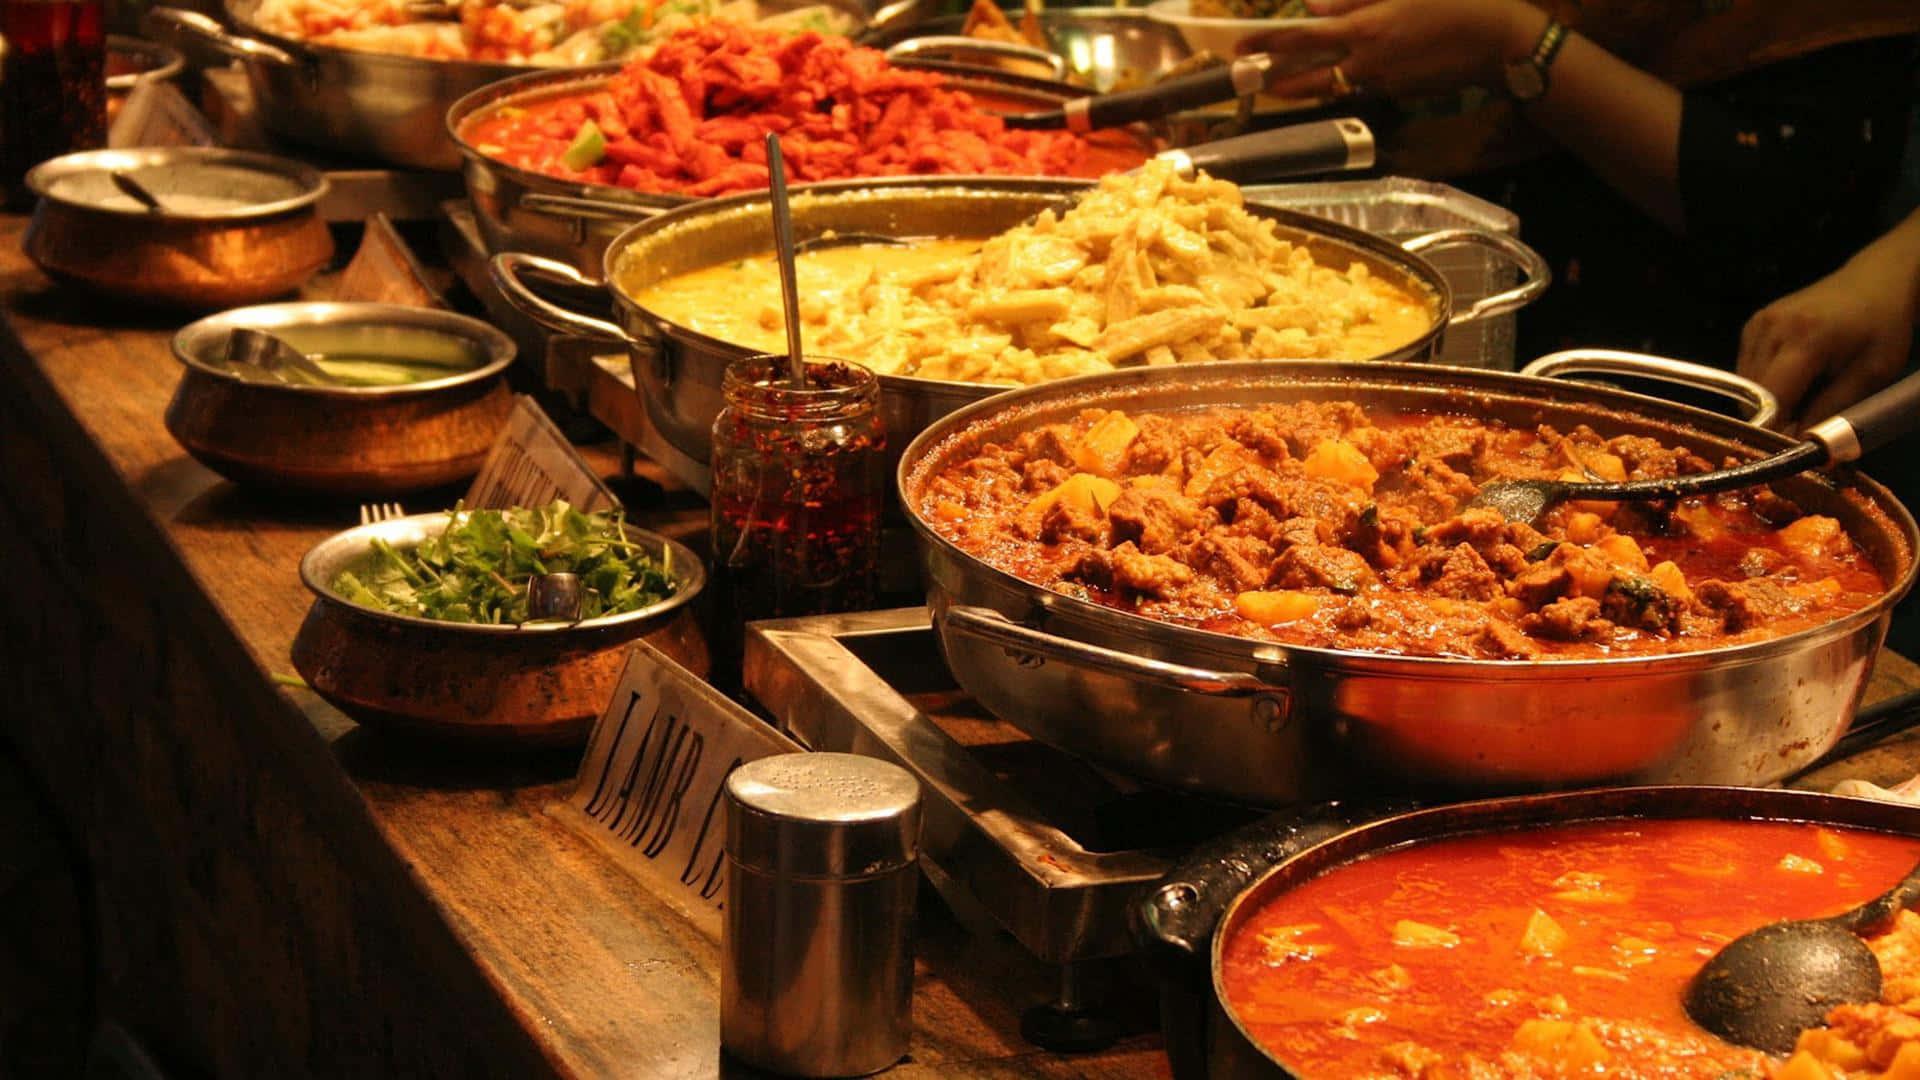 A delicious feast of Indian cuisine